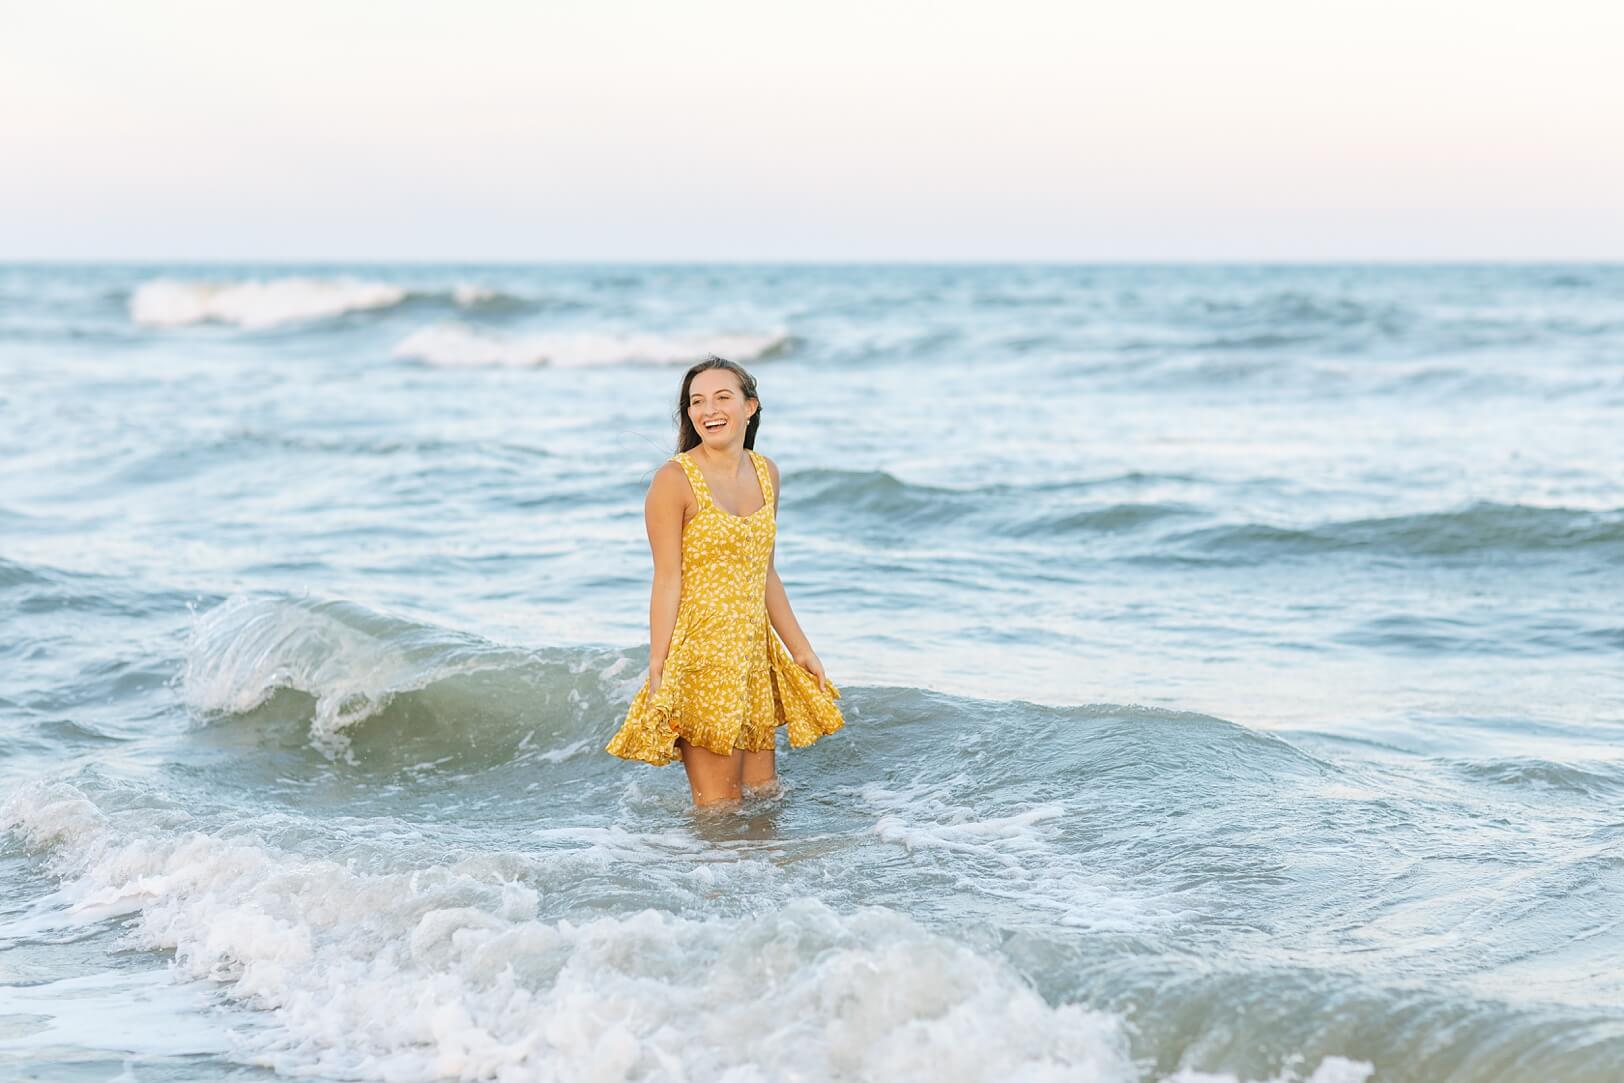 Girl in yellow dress in ocean at sunset